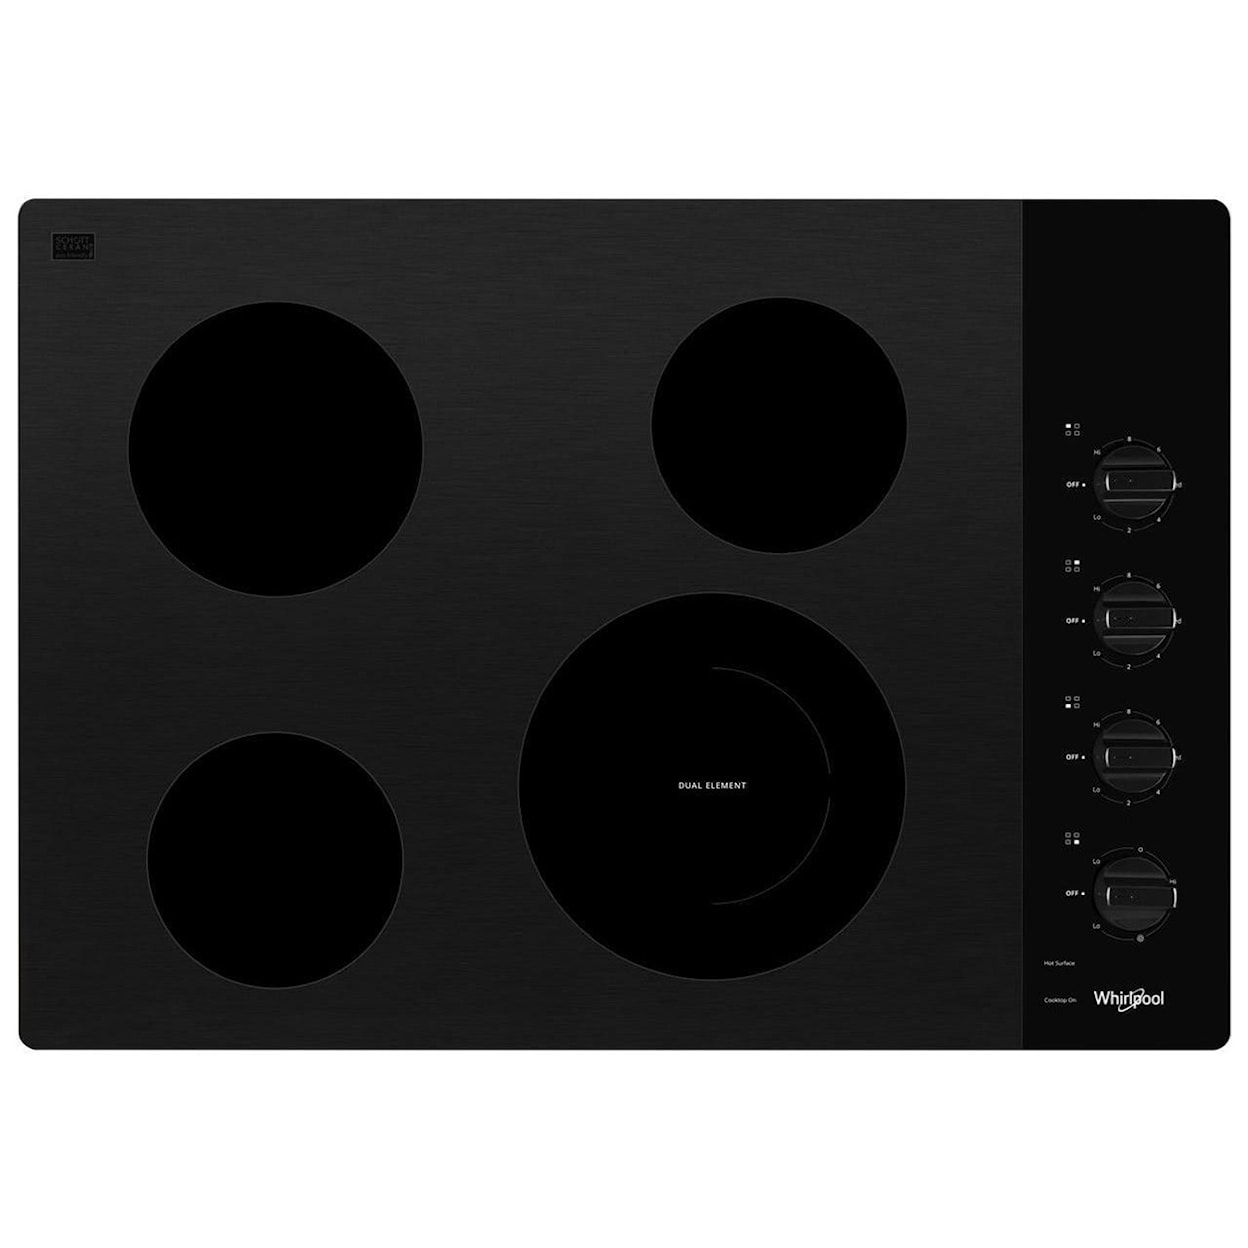 Whirlpool Electric Cooktops 30-inch Electric Ceramic Glass Cooktop